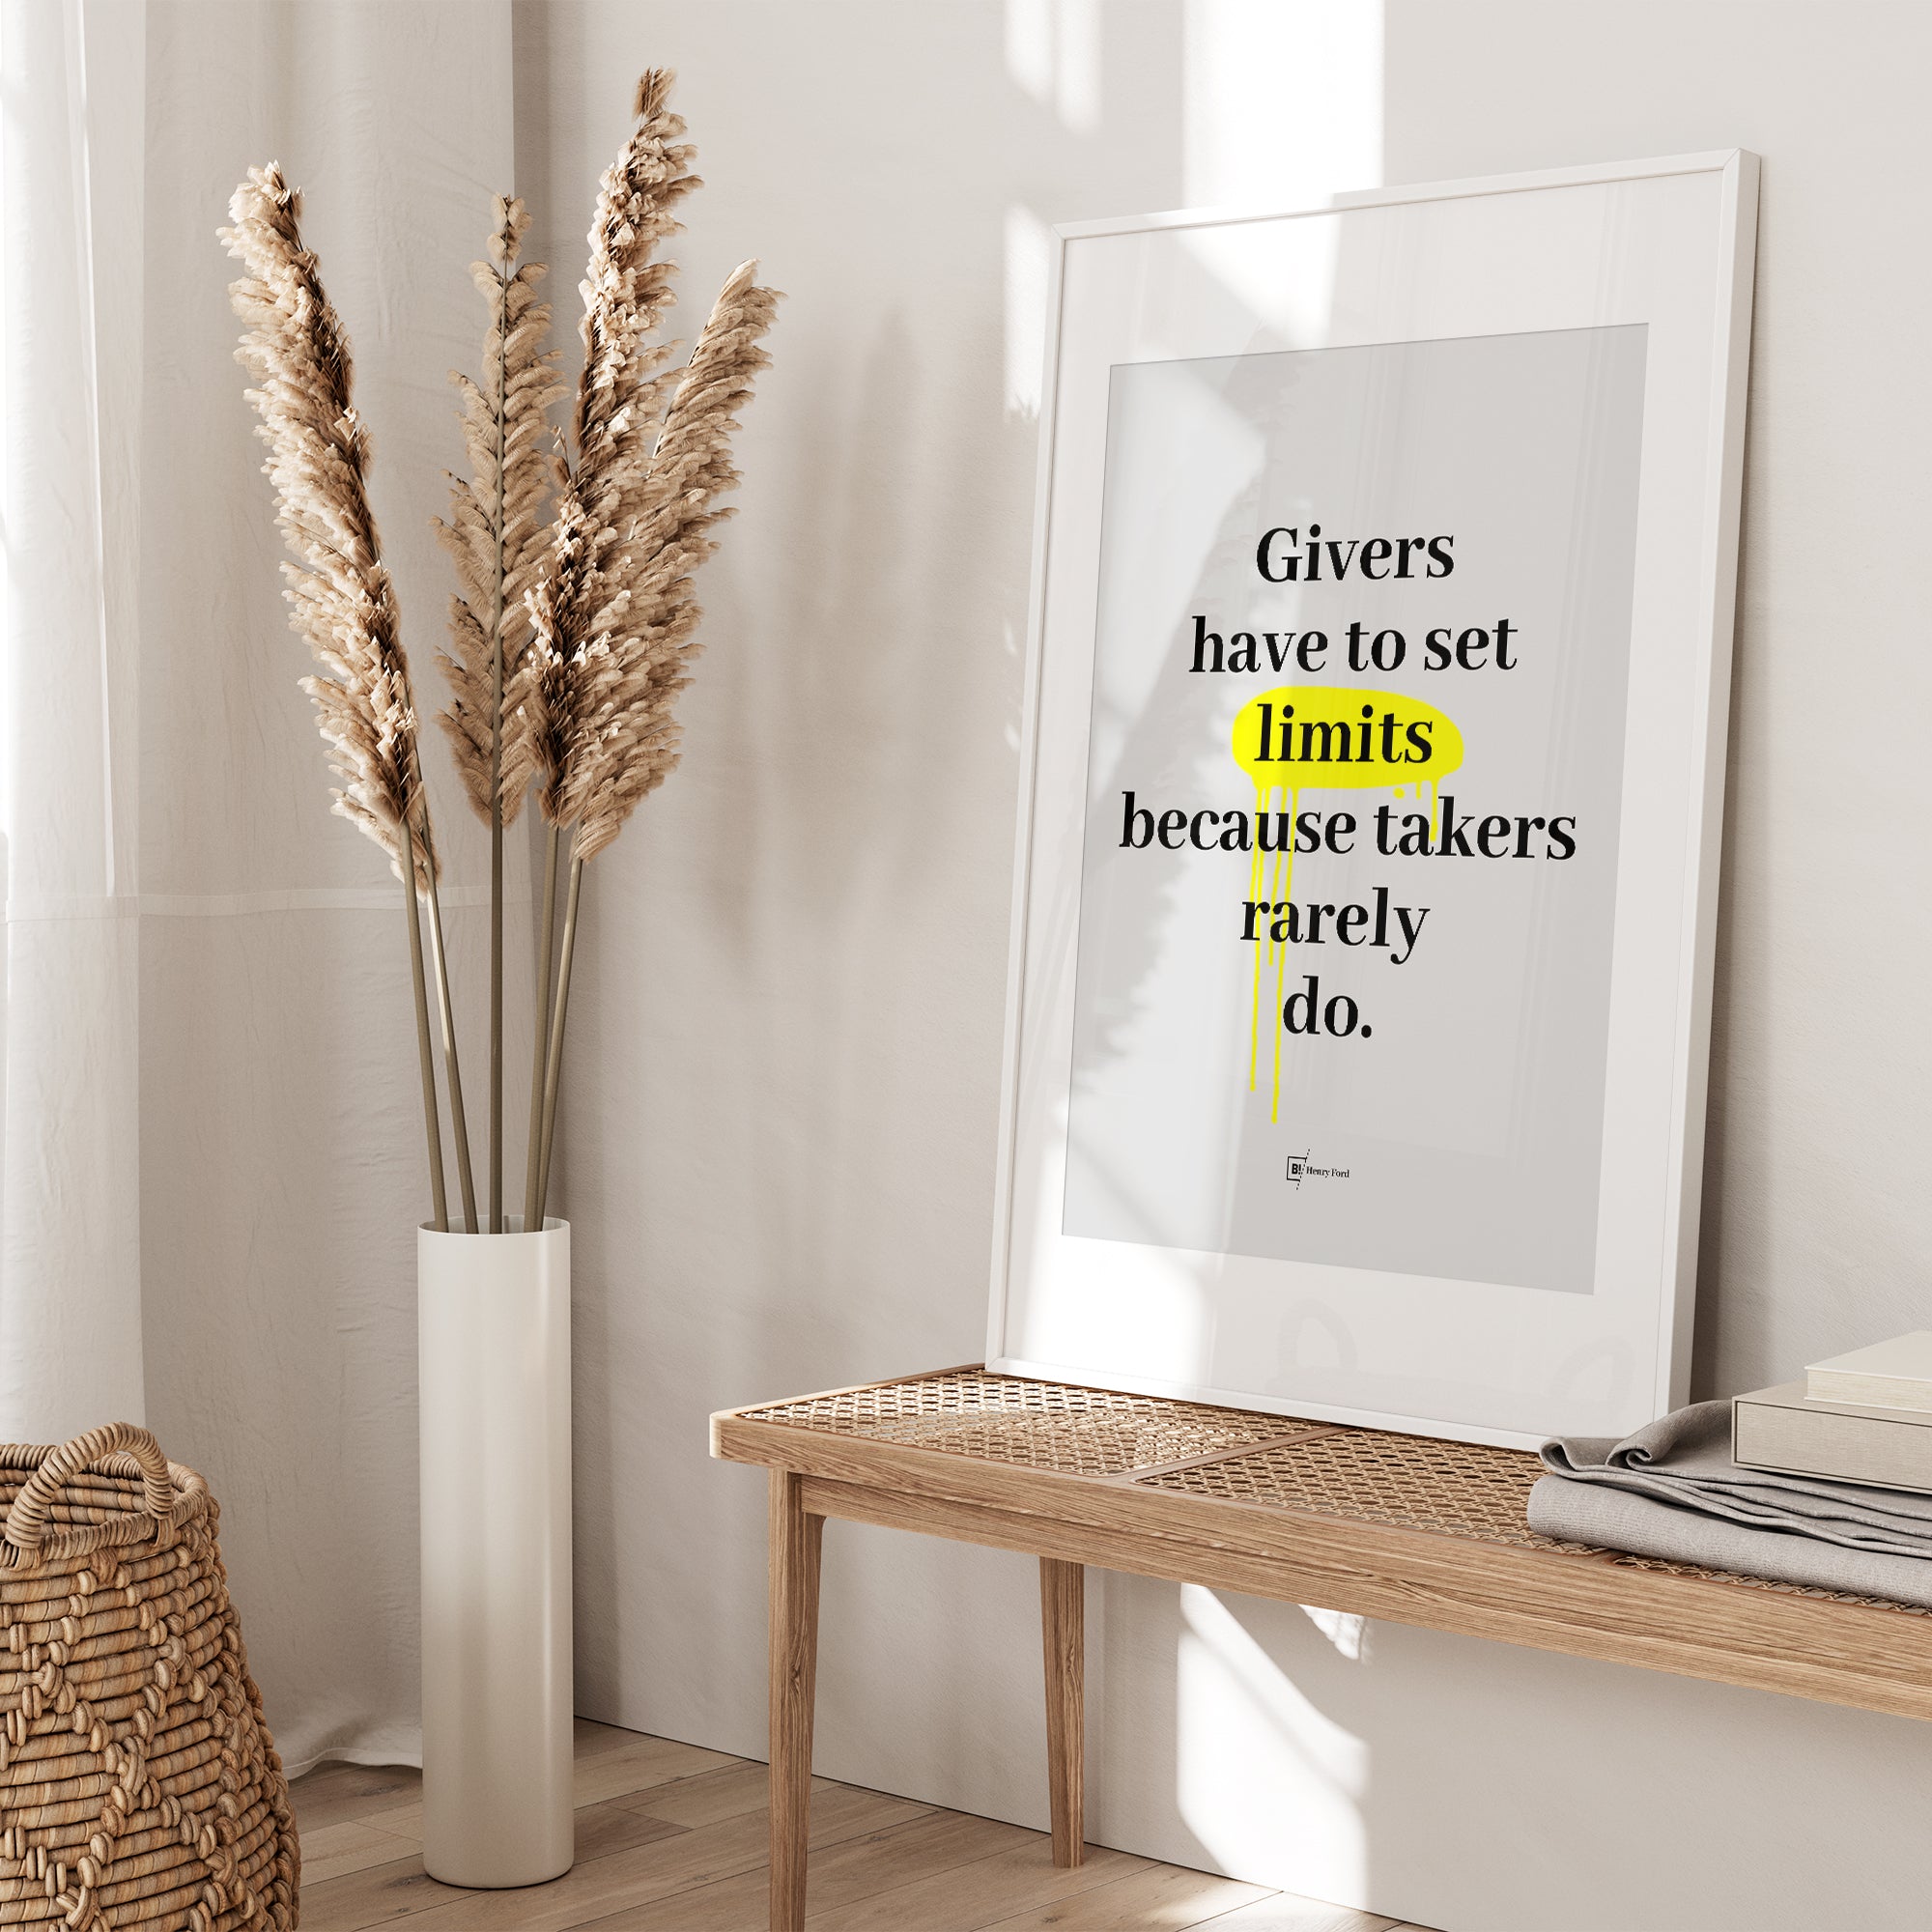 Be inspired by Henry Ford's famous "Givers have to set limits because takers rarely do" quote art print. This artwork was printed using the giclée process on archival acid-free paper and is presented in a white frame with passe-partout that captures its timeless beauty in every detail.